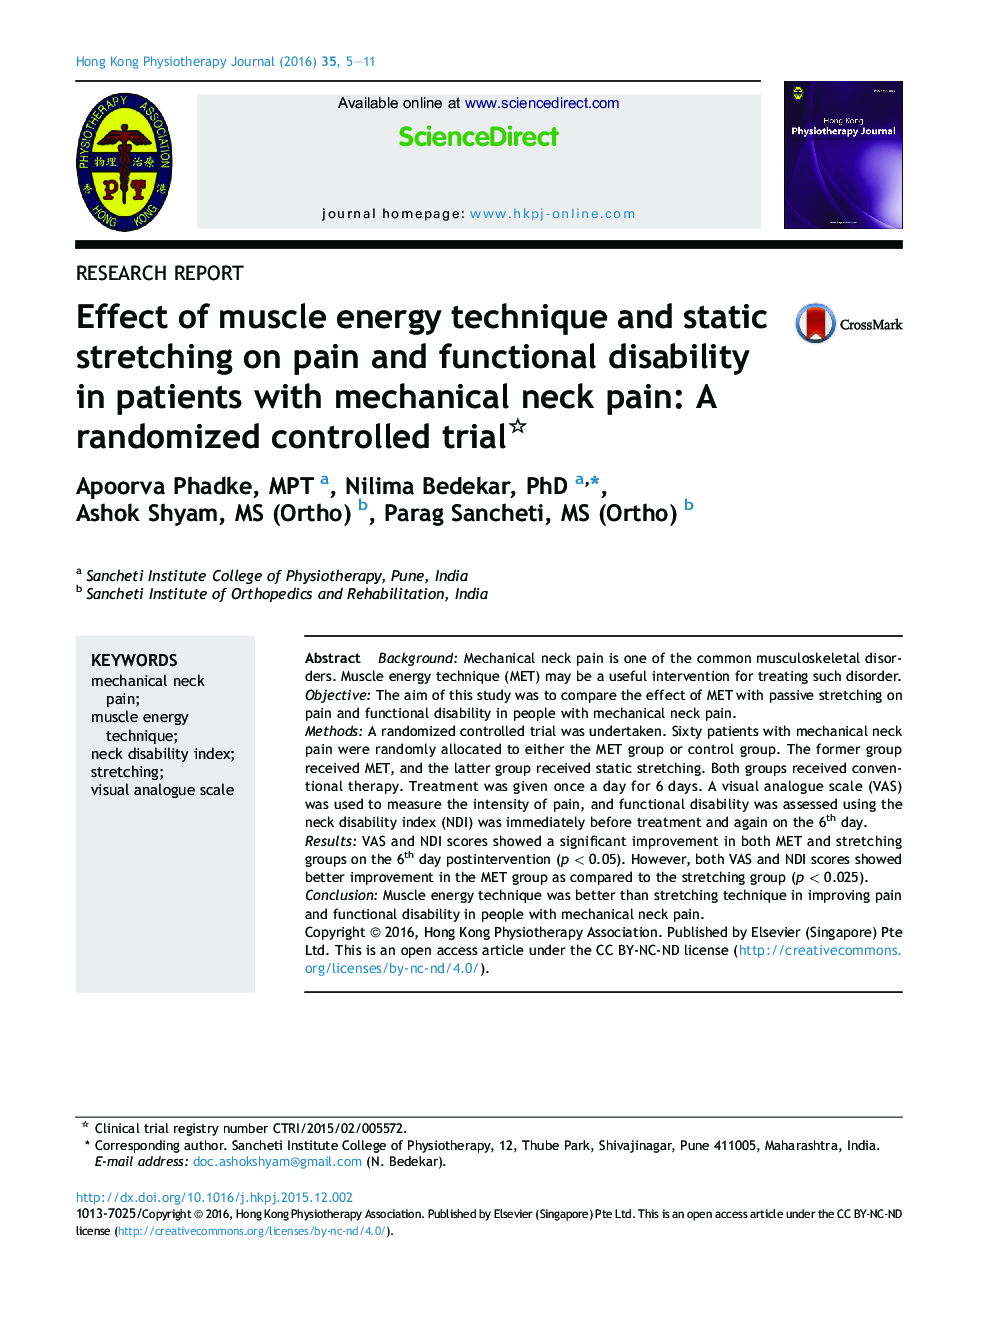 Effect of muscle energy technique and static stretching on pain and functional disability in patients with mechanical neck pain: A randomized controlled trial 